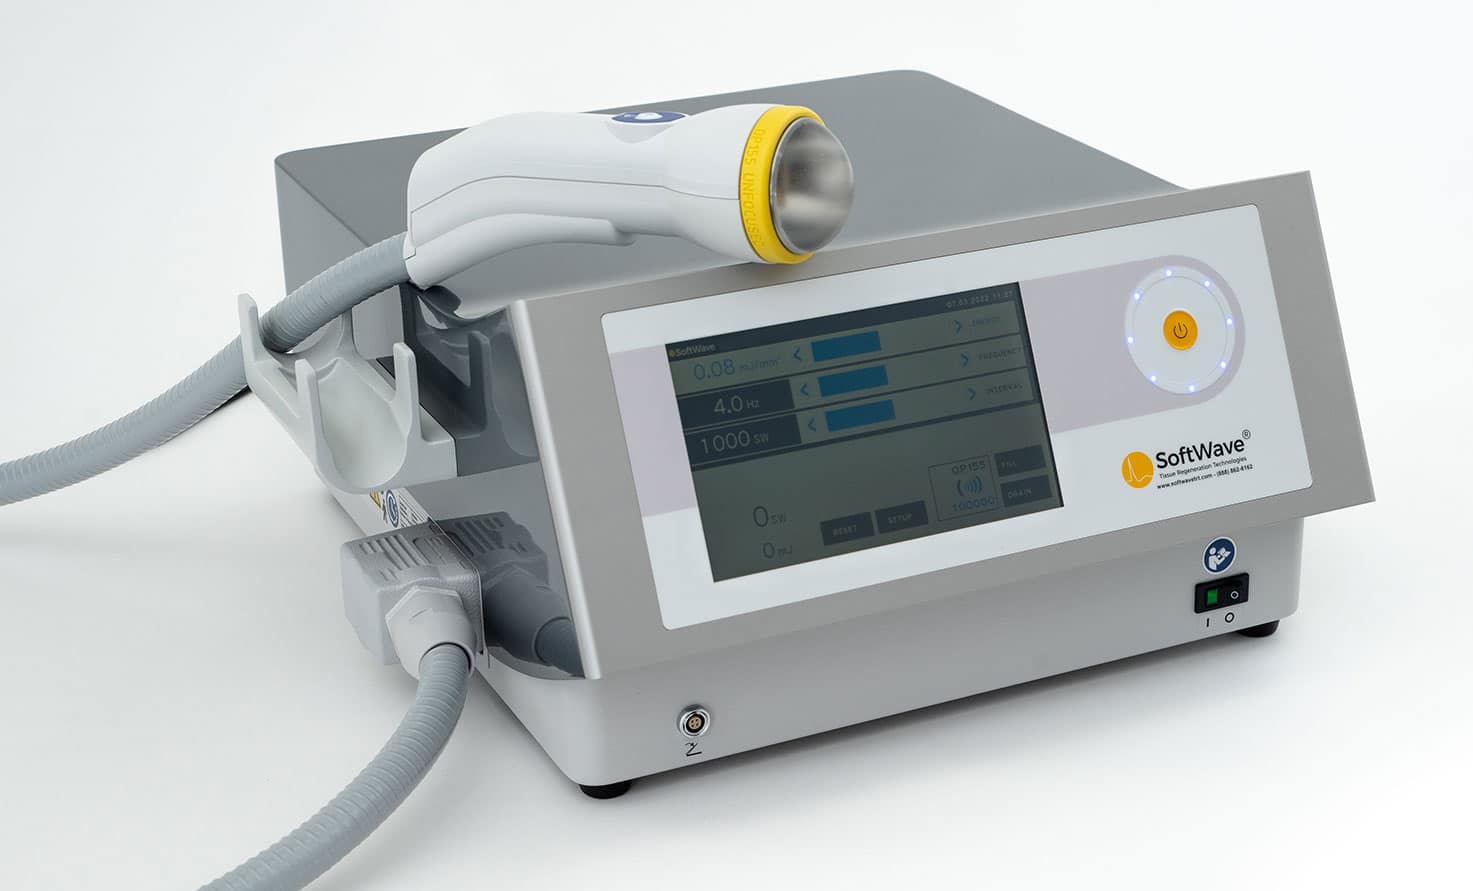 Softwave Therapy machine.